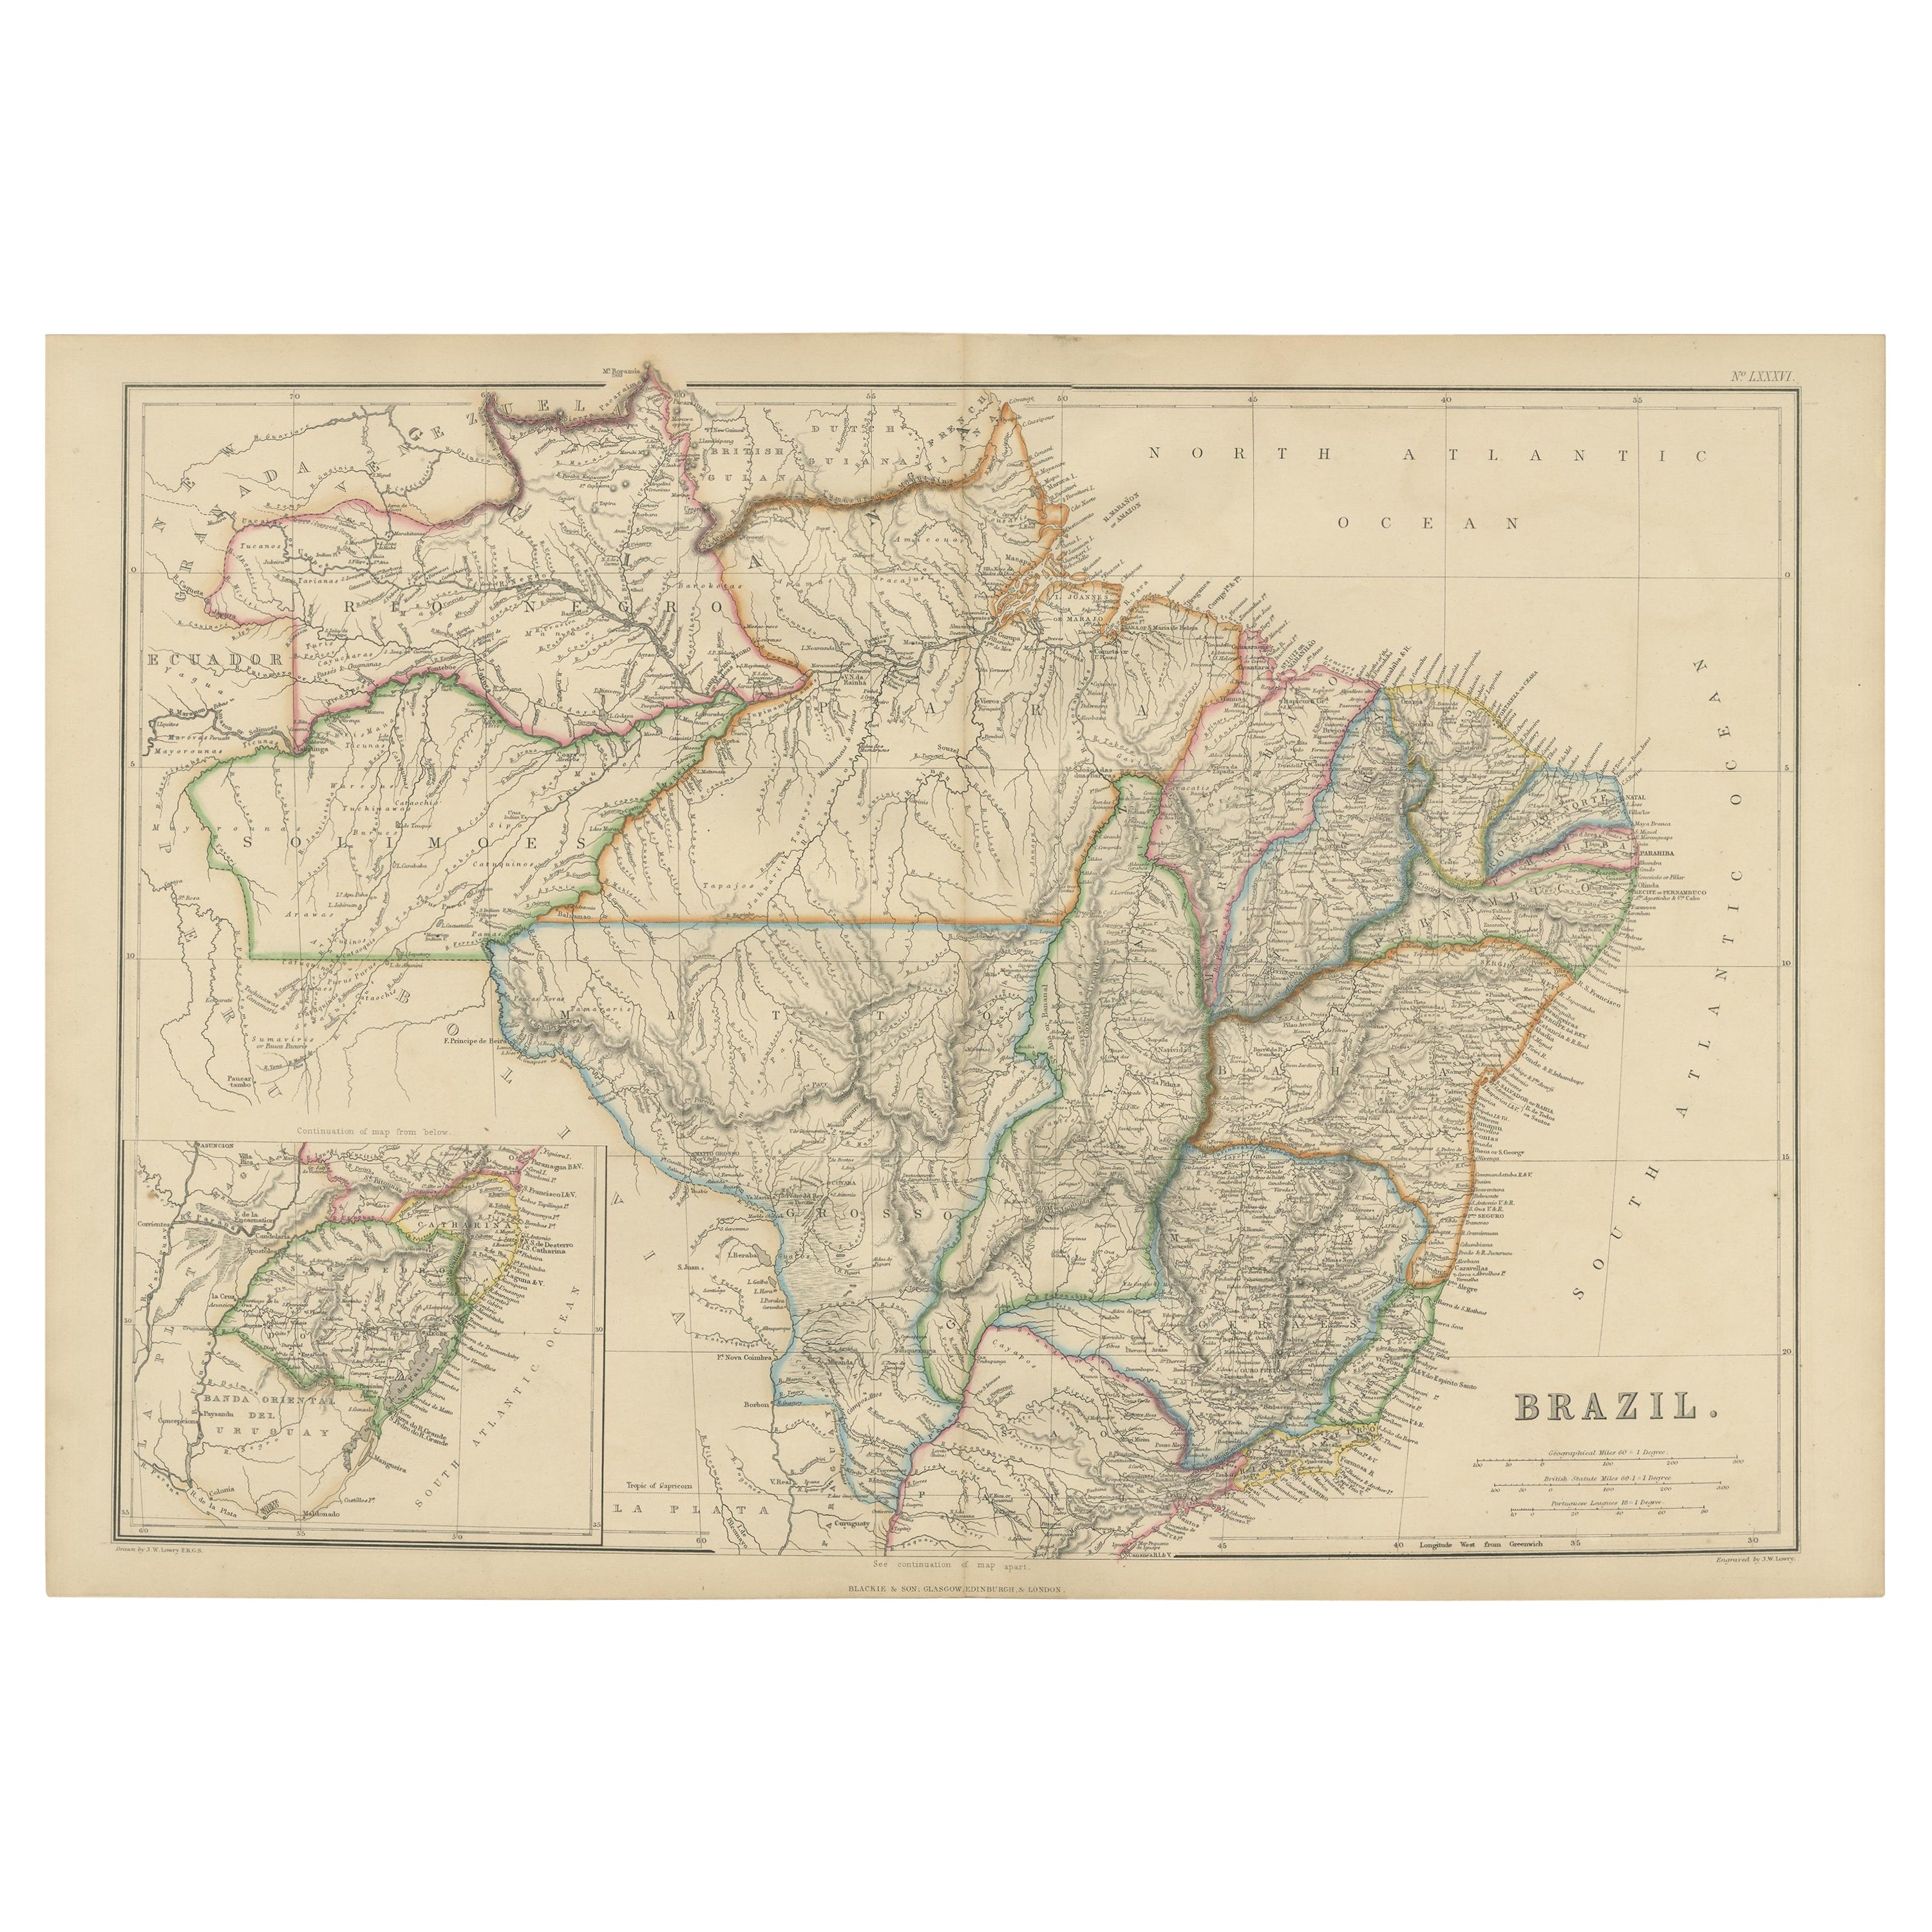 Antique Map of Brazil by W. G. Blackie, 1859